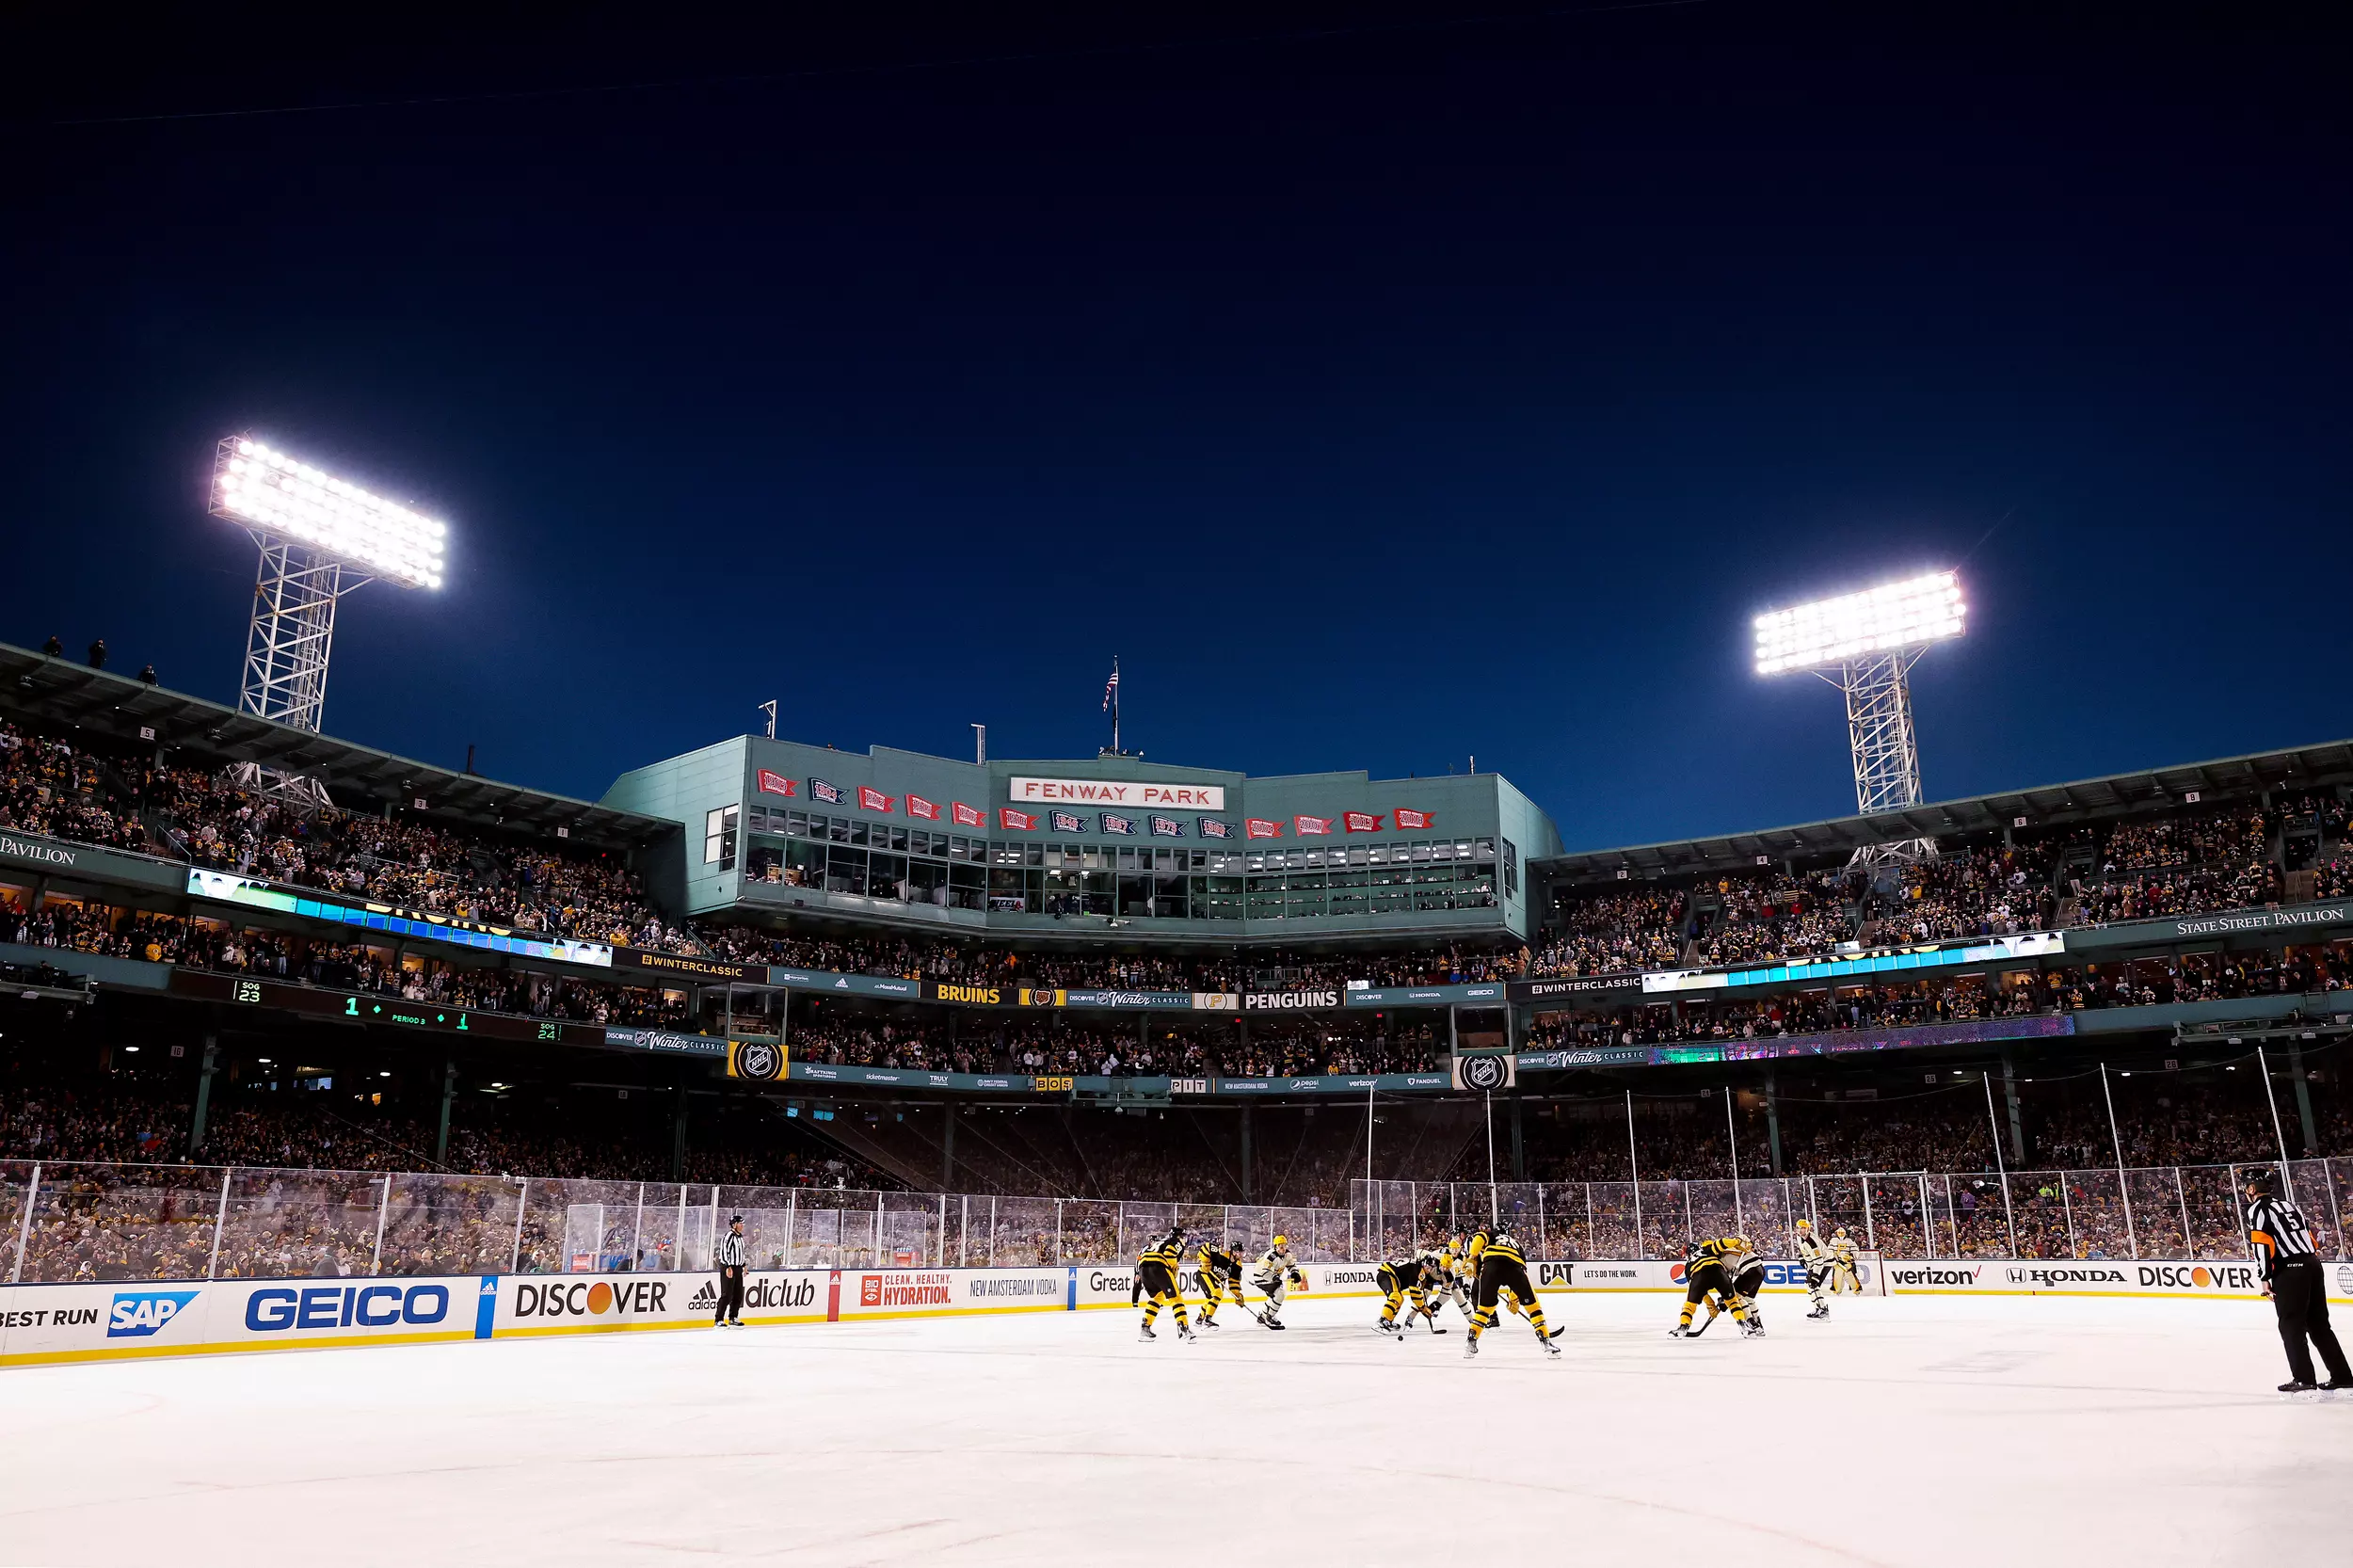 Photo gallery: Penguins, Bruins take the ice for Winter Classic at Fenway  Park